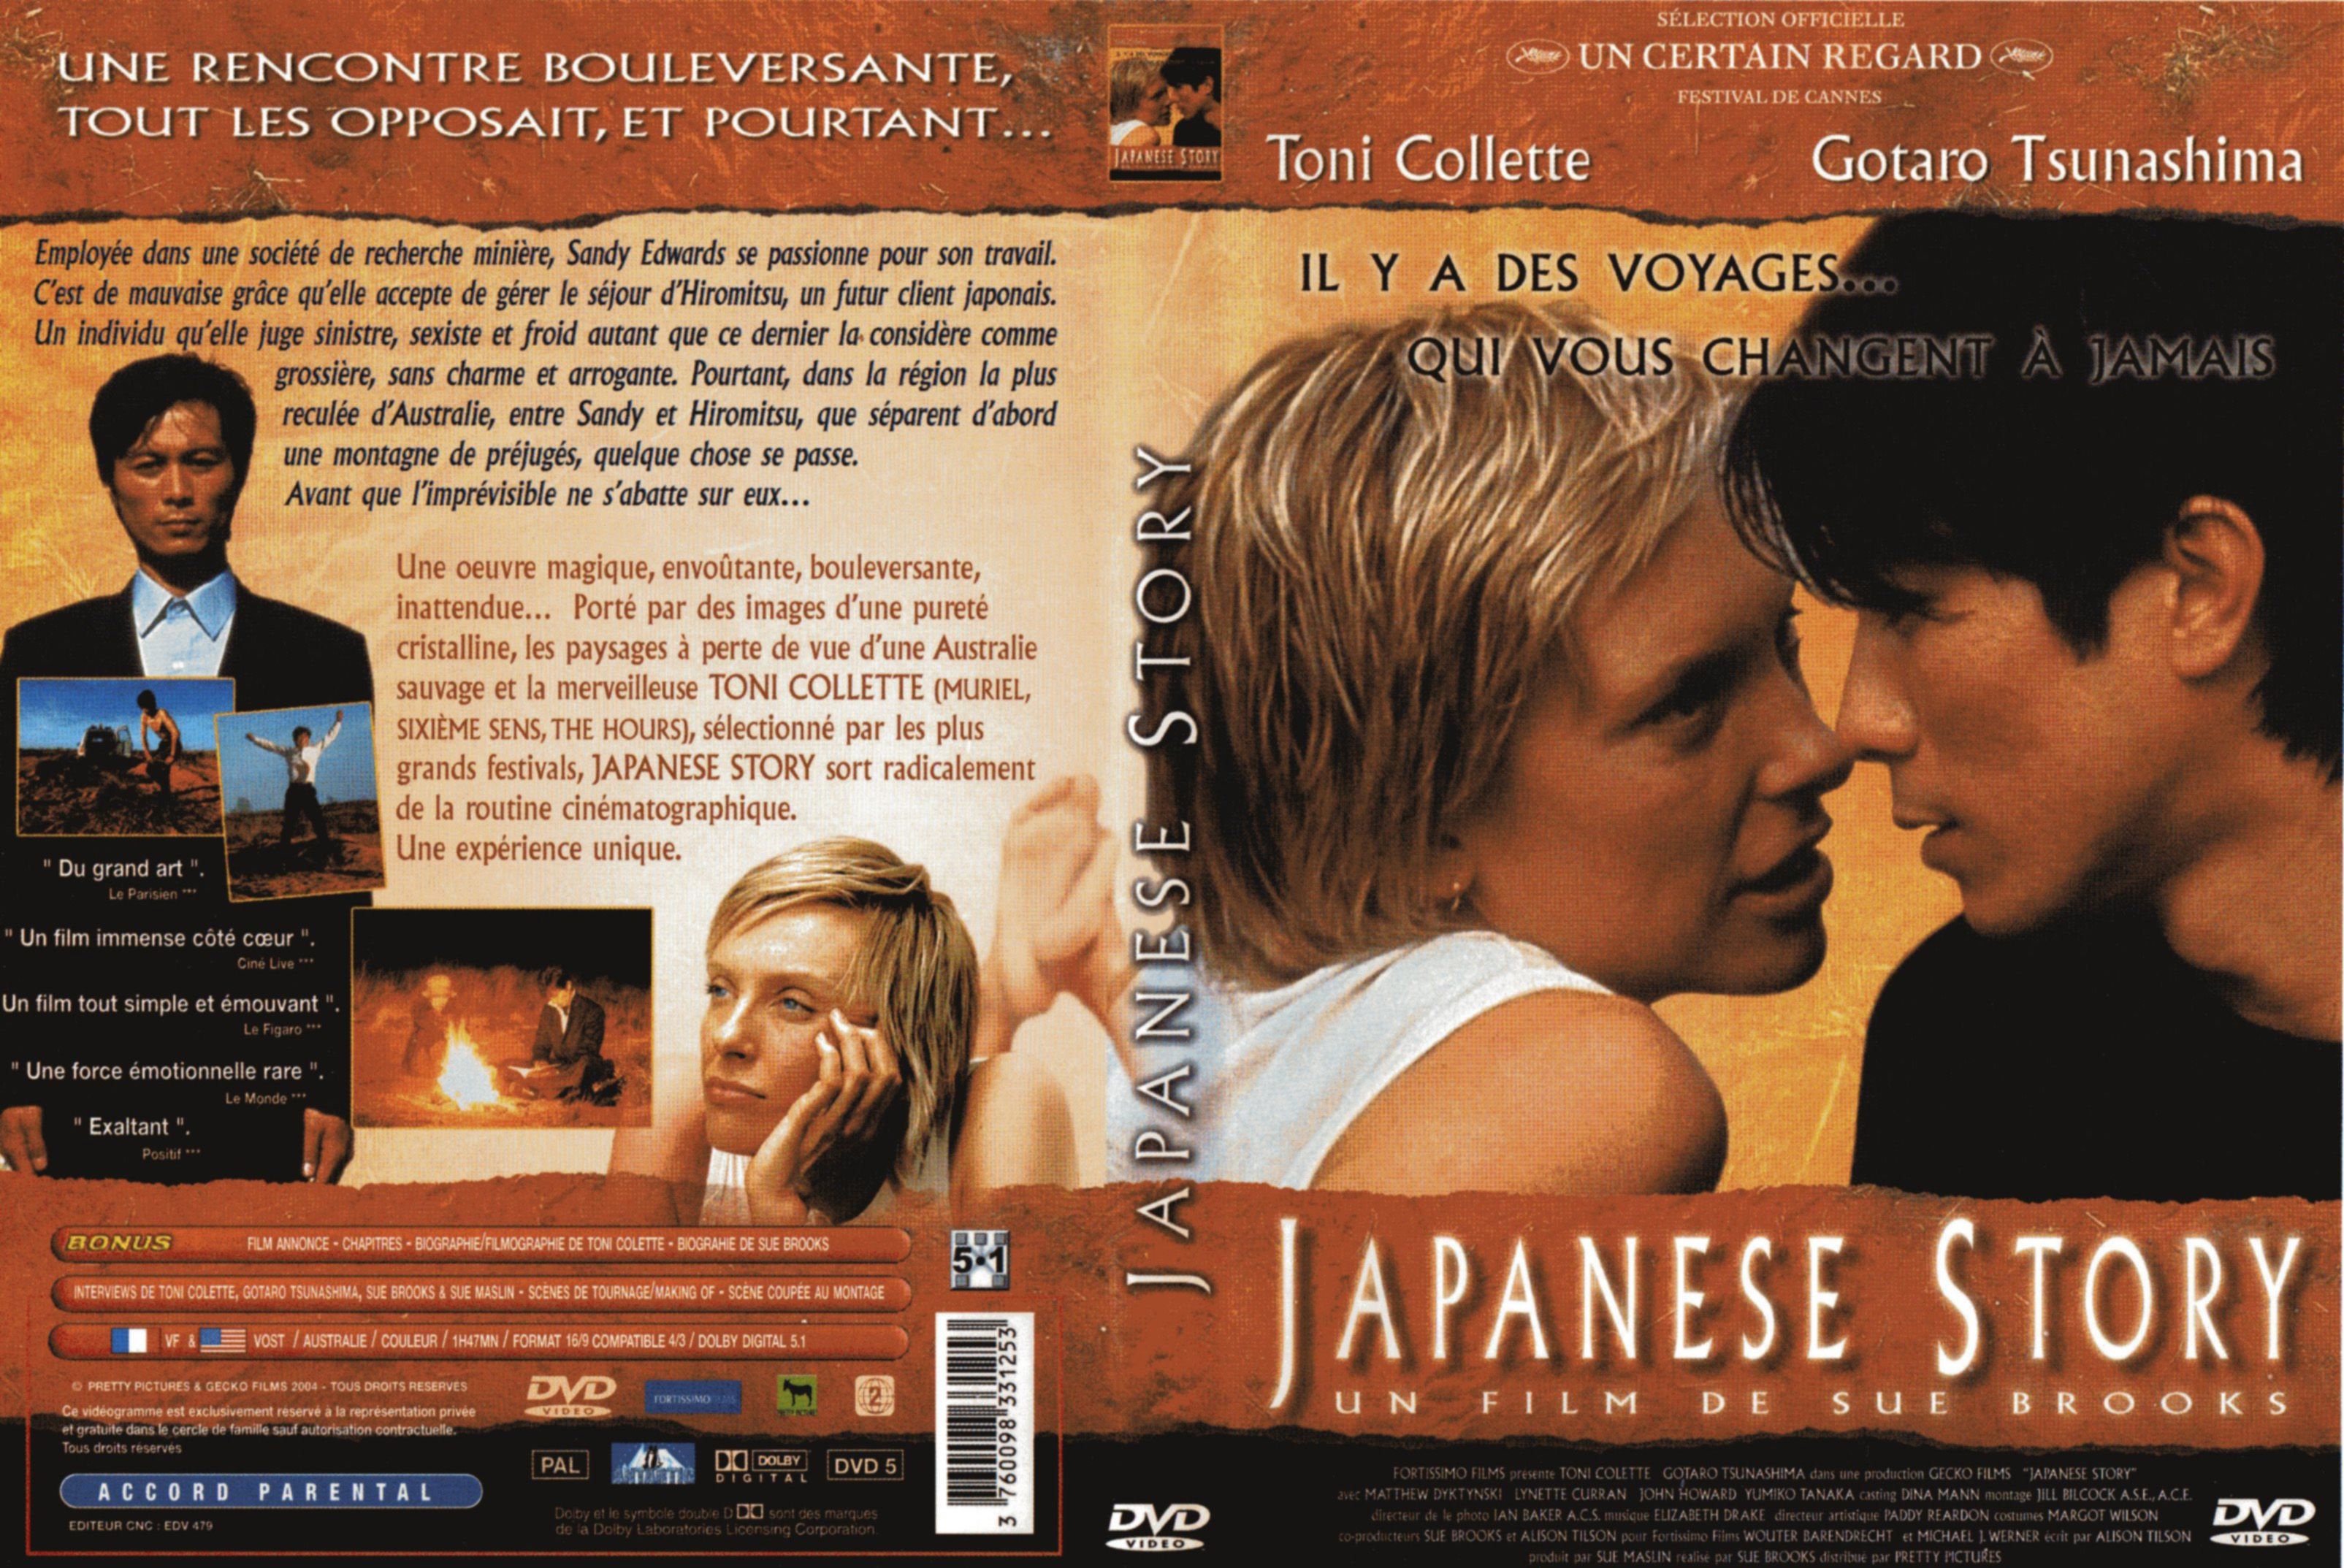 Jaquette DVD Japanese Story